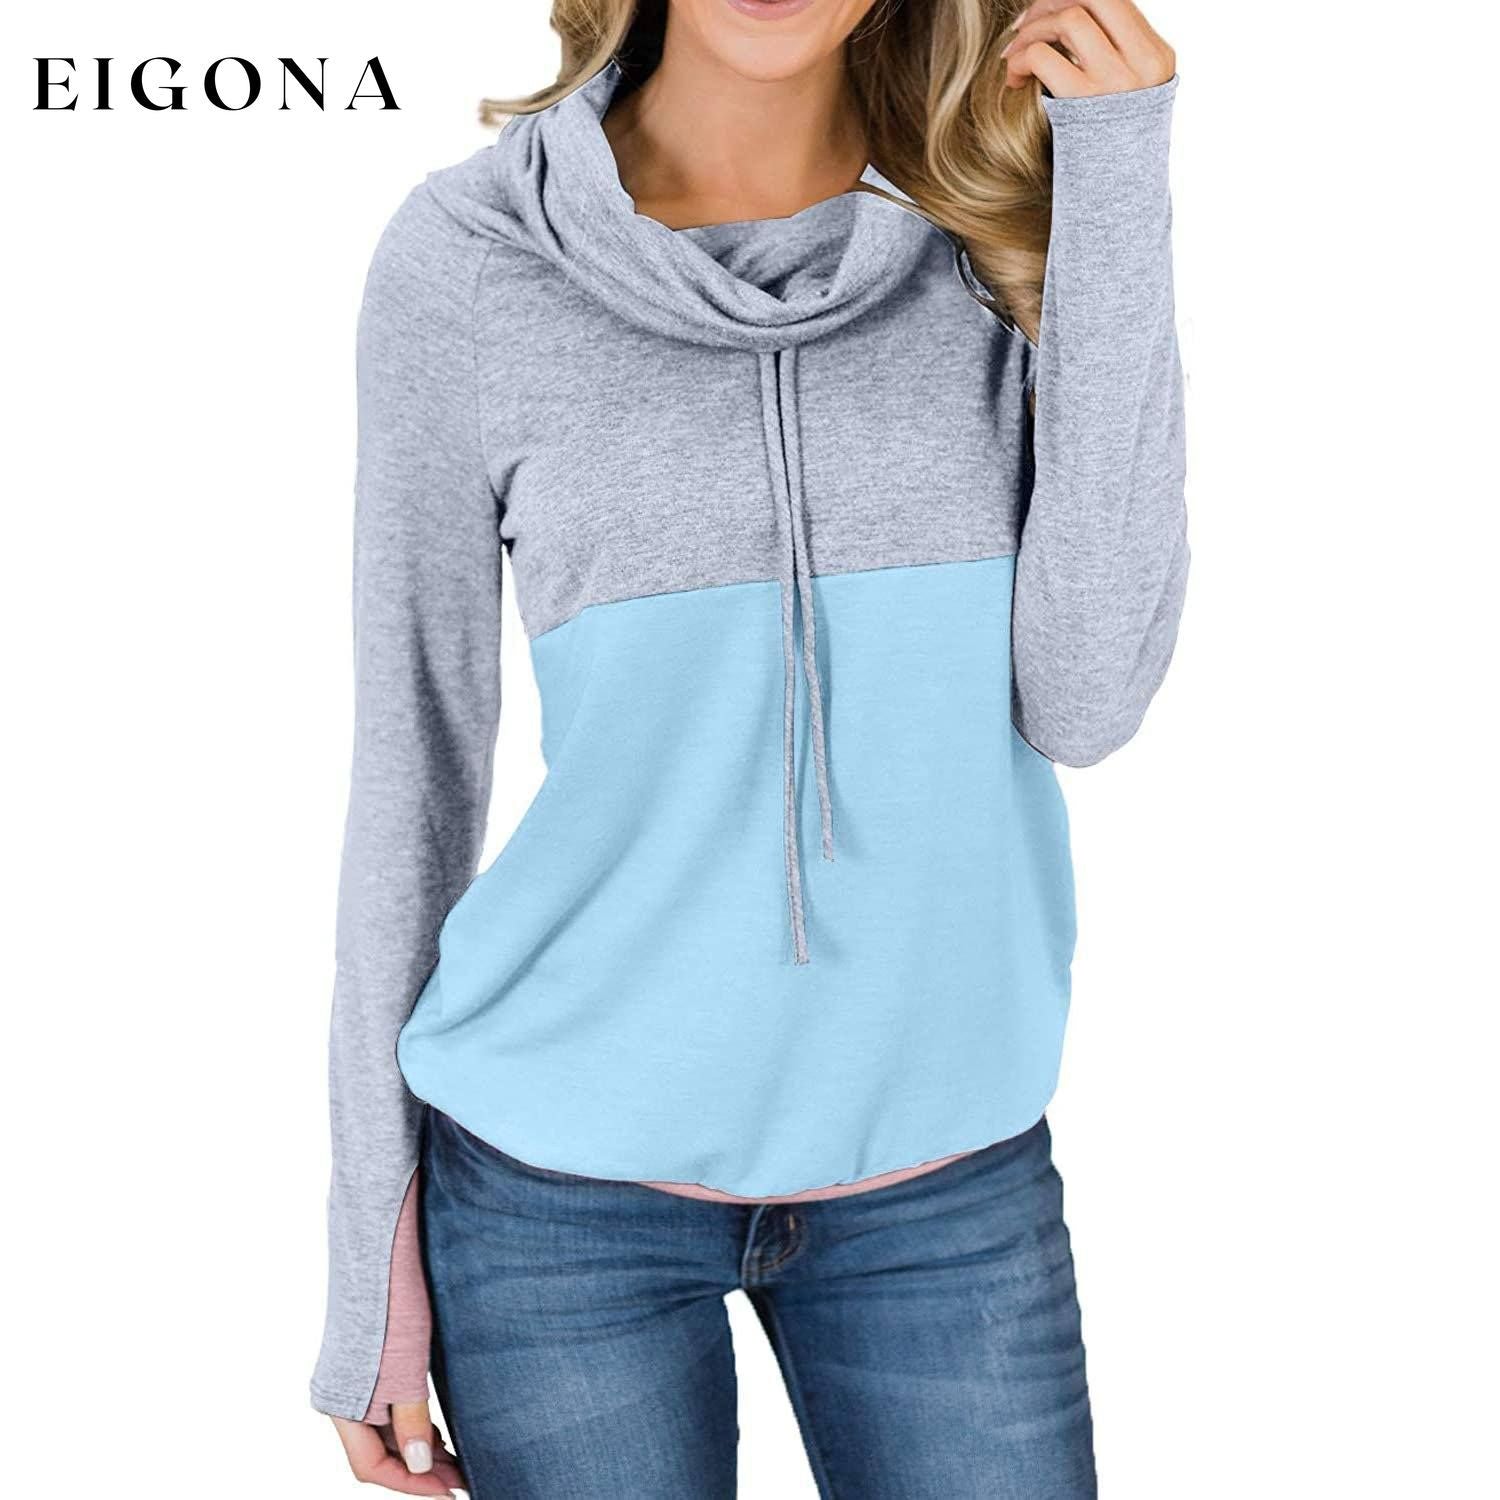 Women Cowl Neck Casual Tunic Sweatshirts Drawstring Long Sleeve Color Block Patchwork Pullover Tops Blue __stock:50 clothes refund_fee:1200 tops